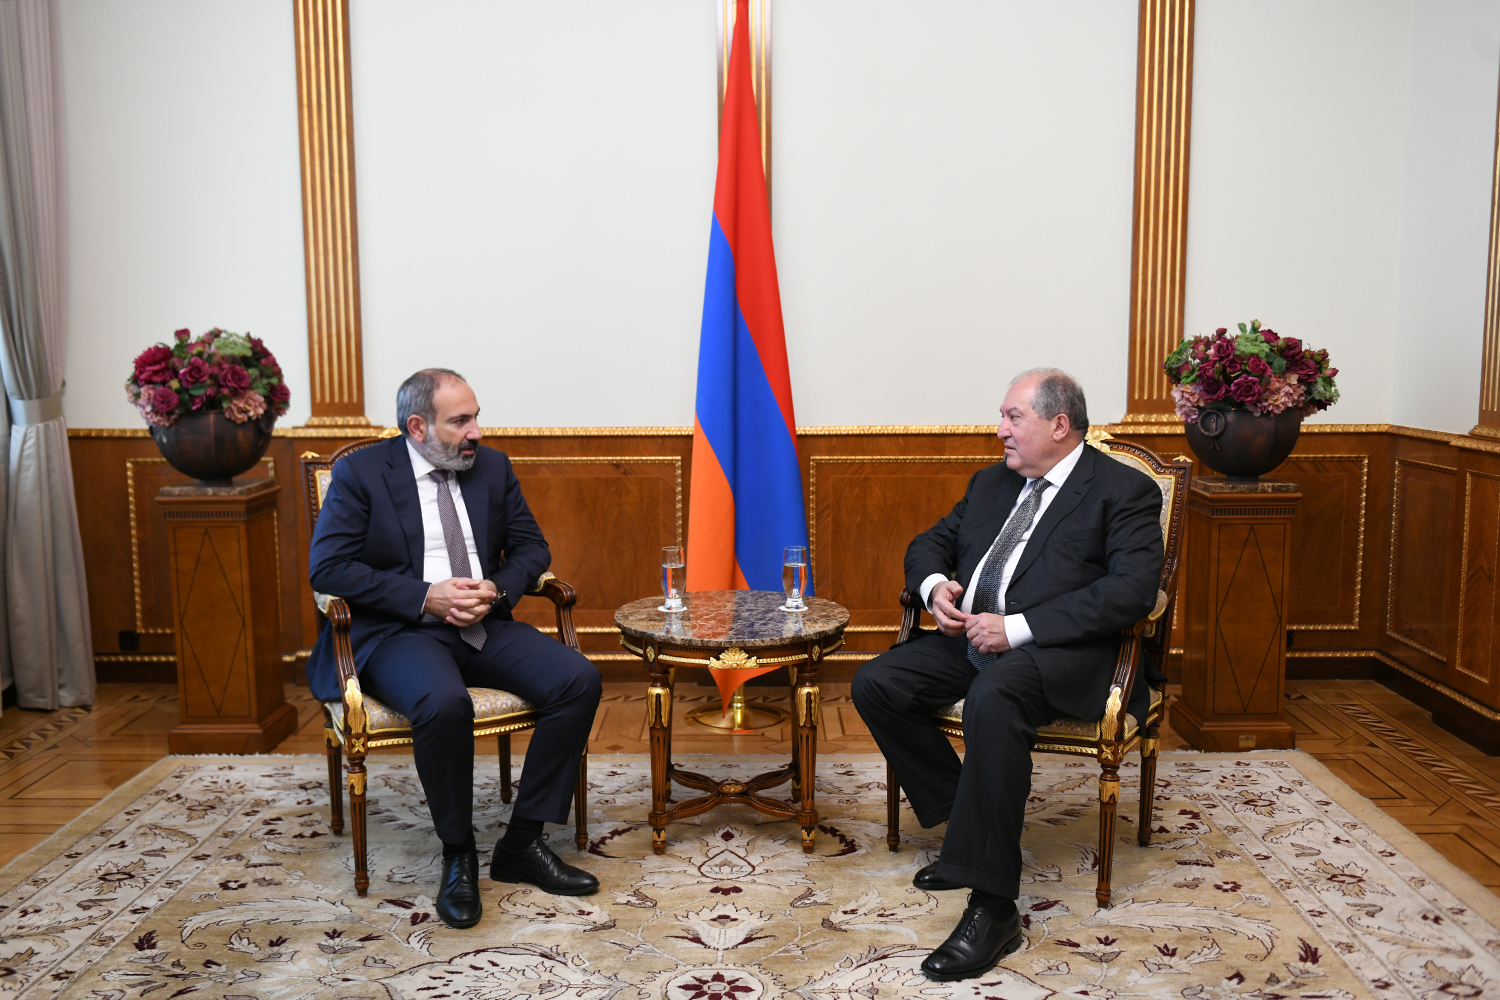 President, Prime Minister had a meeting today - The US Armenians